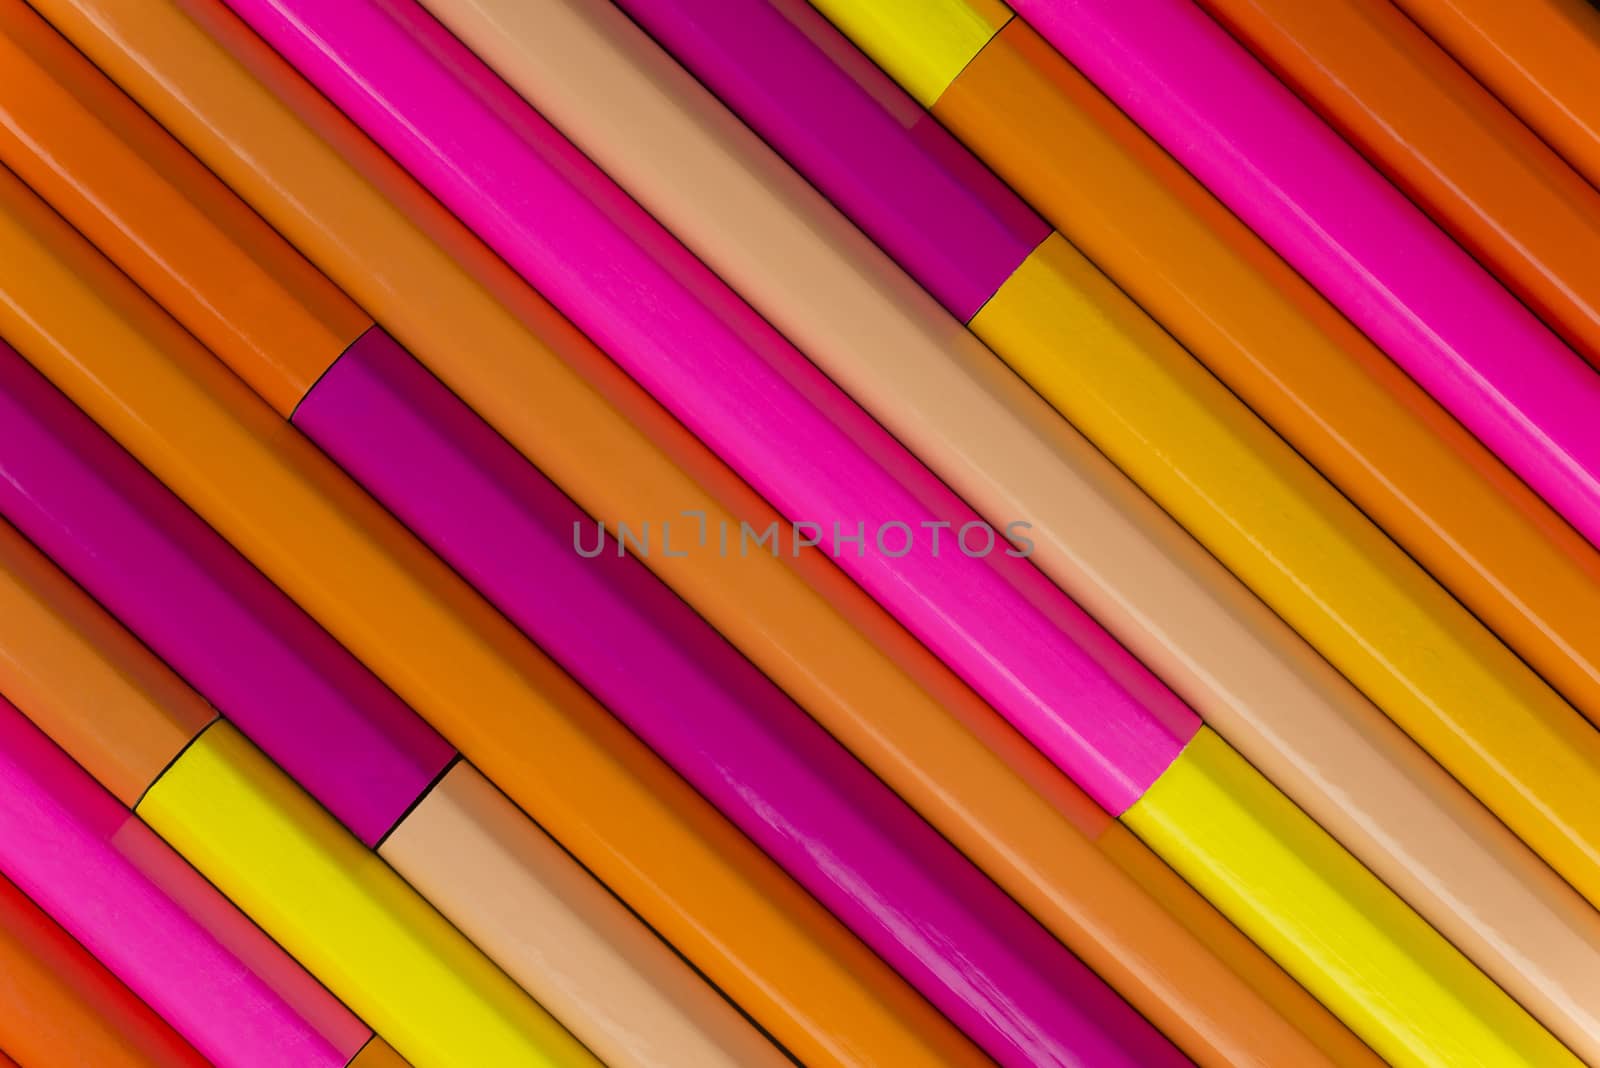 Collection of rose orange pencils in a diagonal line pattern as background picture
